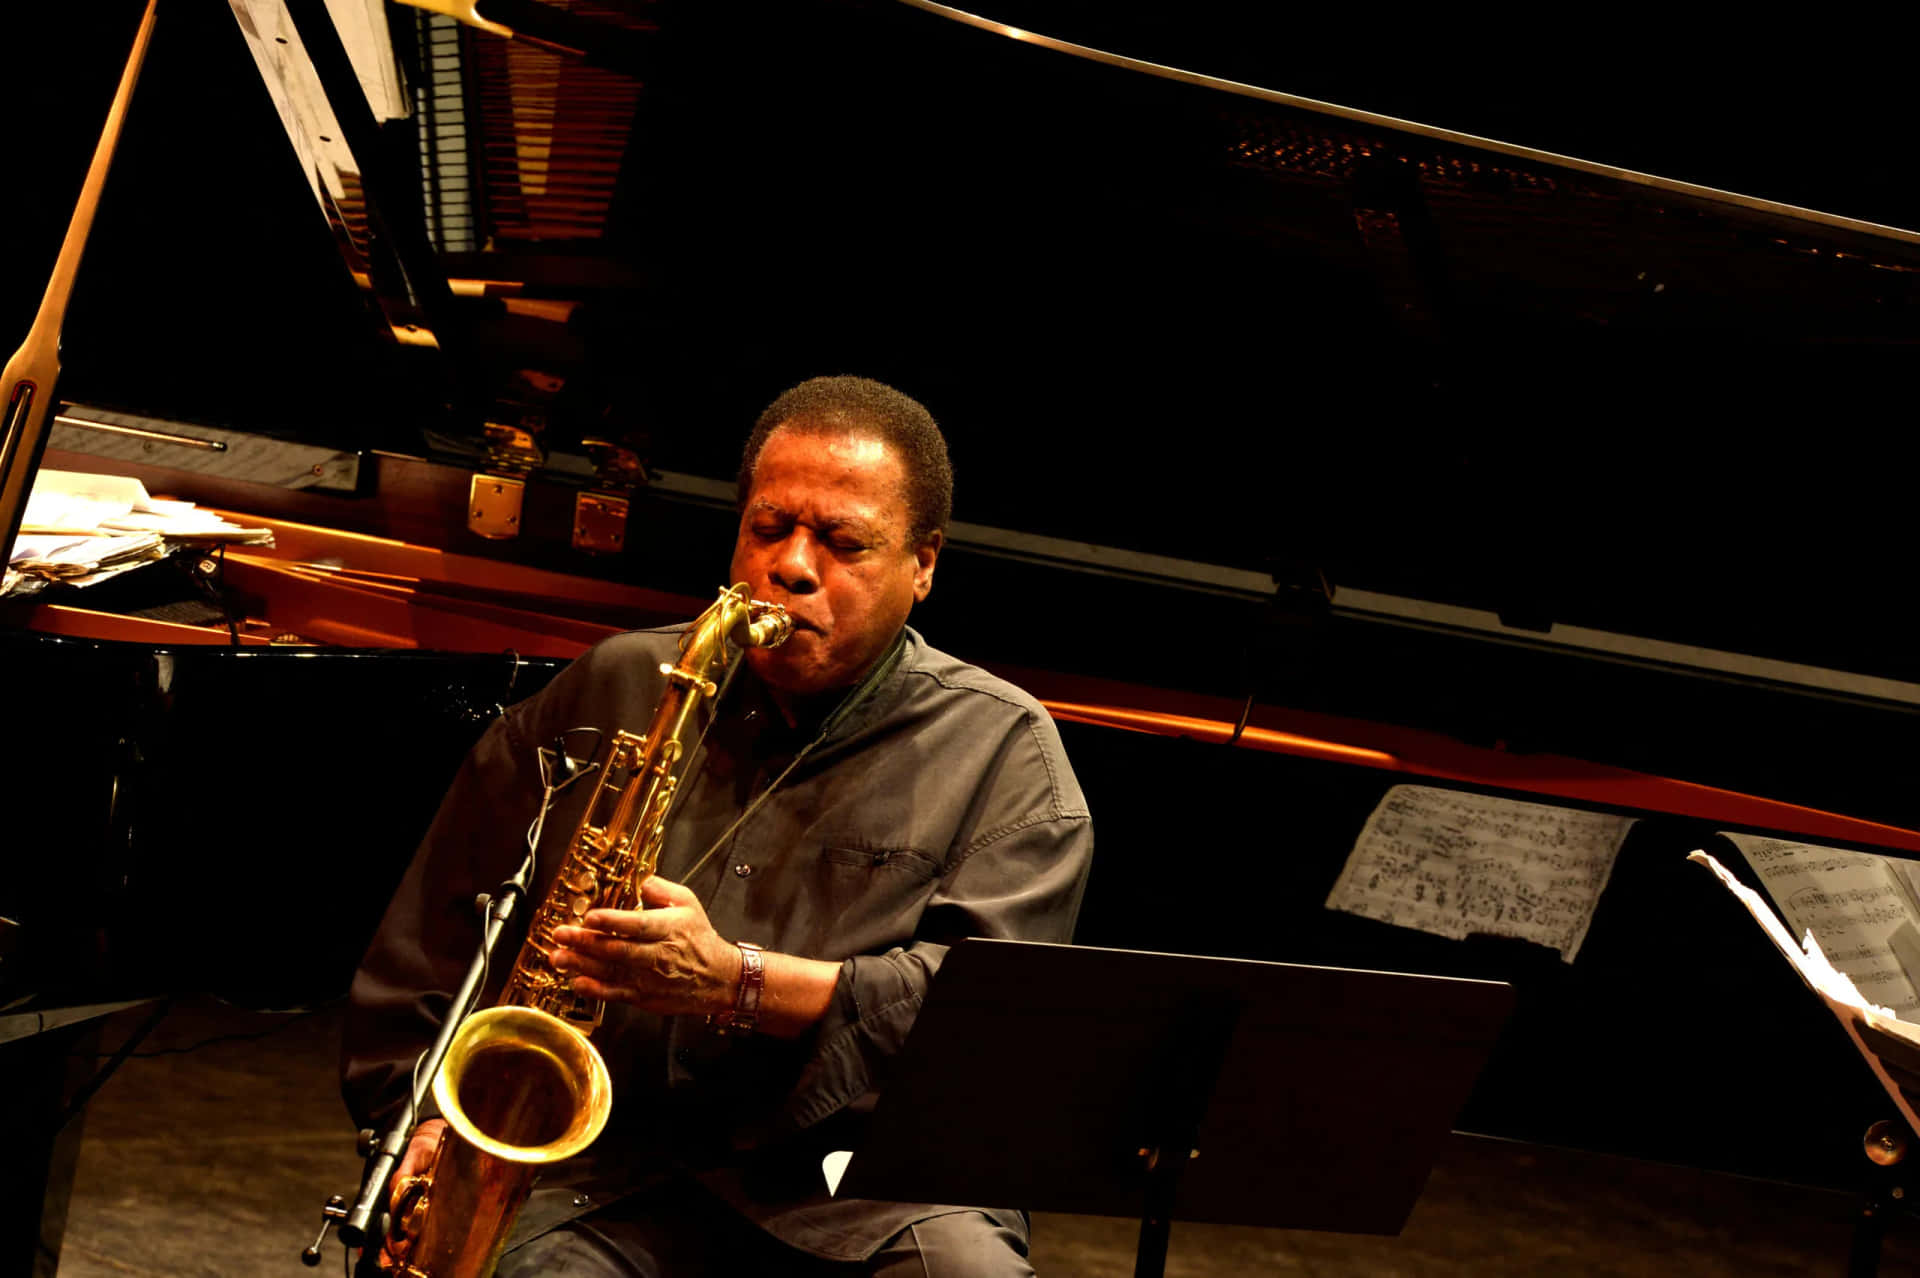 Wayne Shorter on stage during a performance Wallpaper